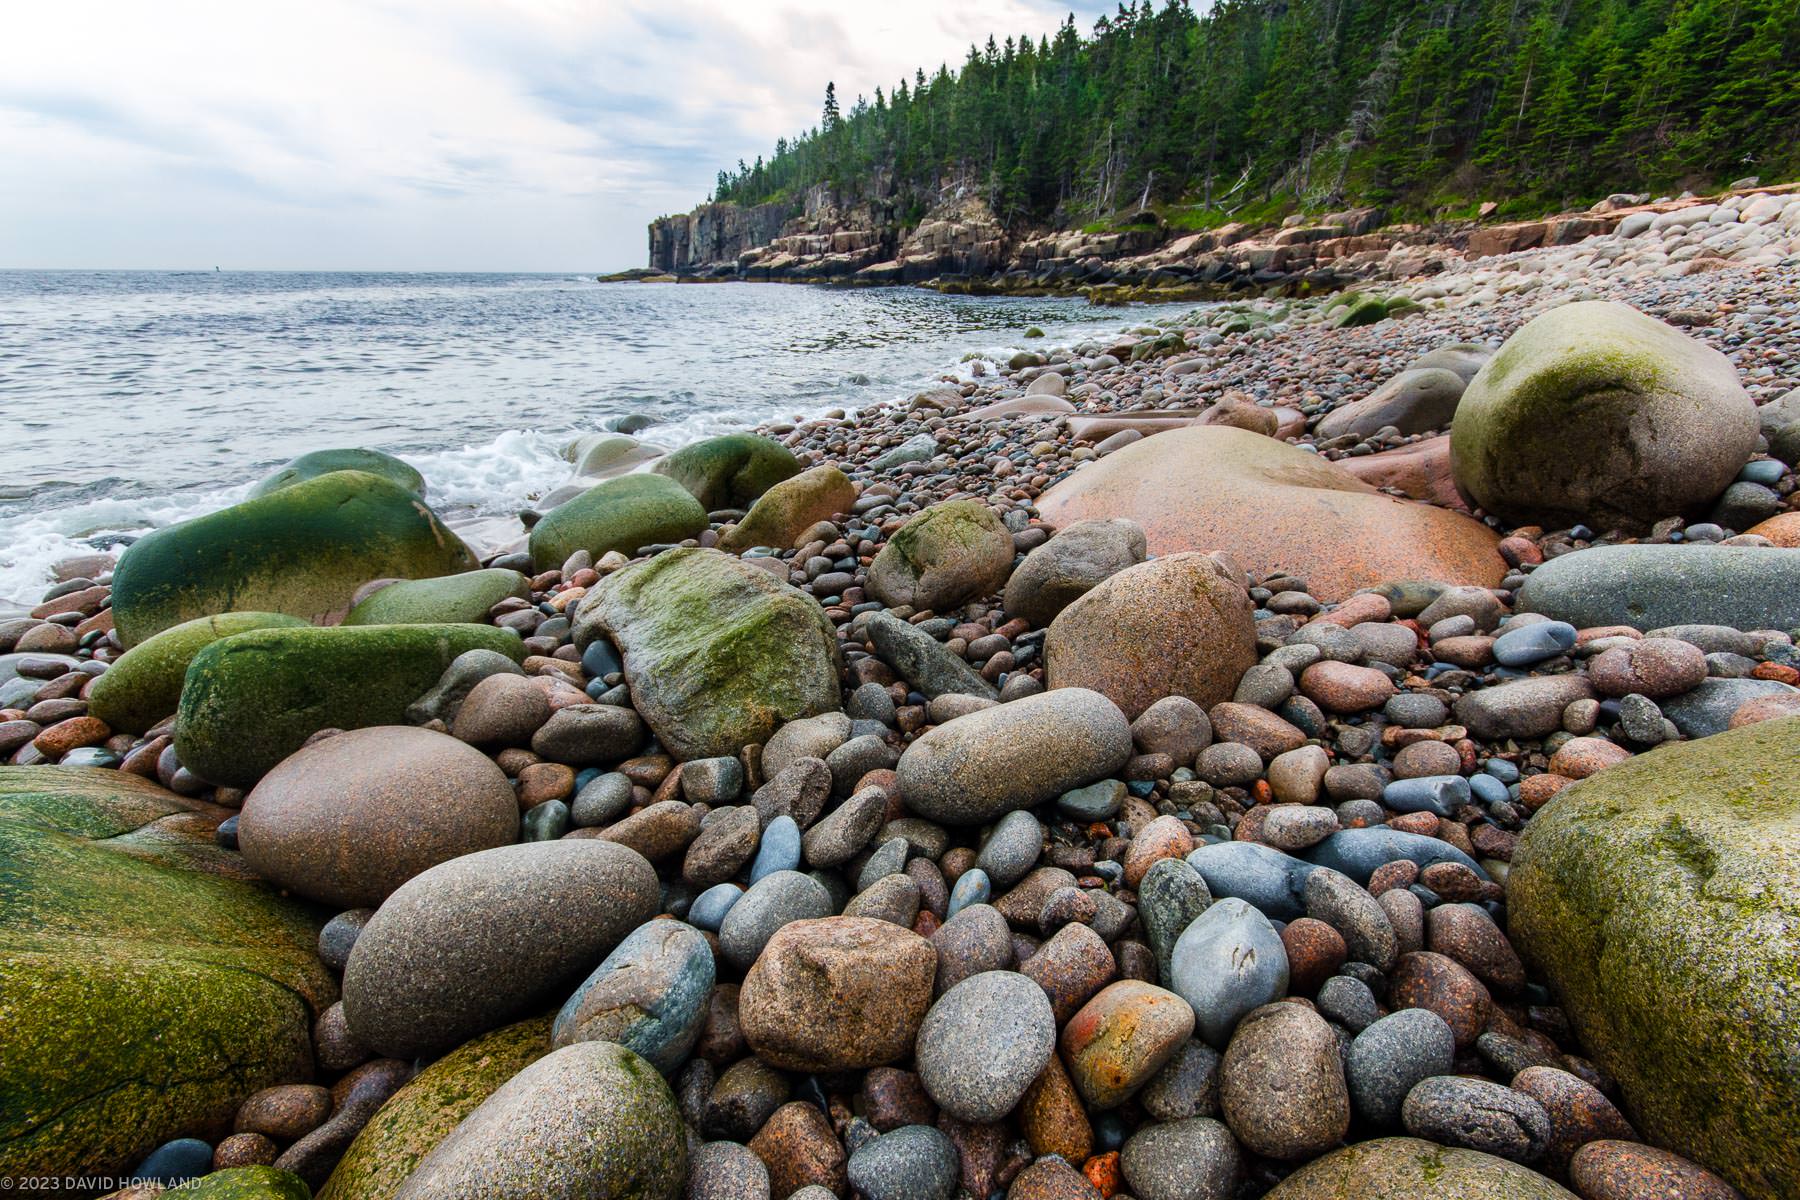 A photo of the waves crashing on the multicolored smooth round boulders on the shores of Acadia National Park in Maine